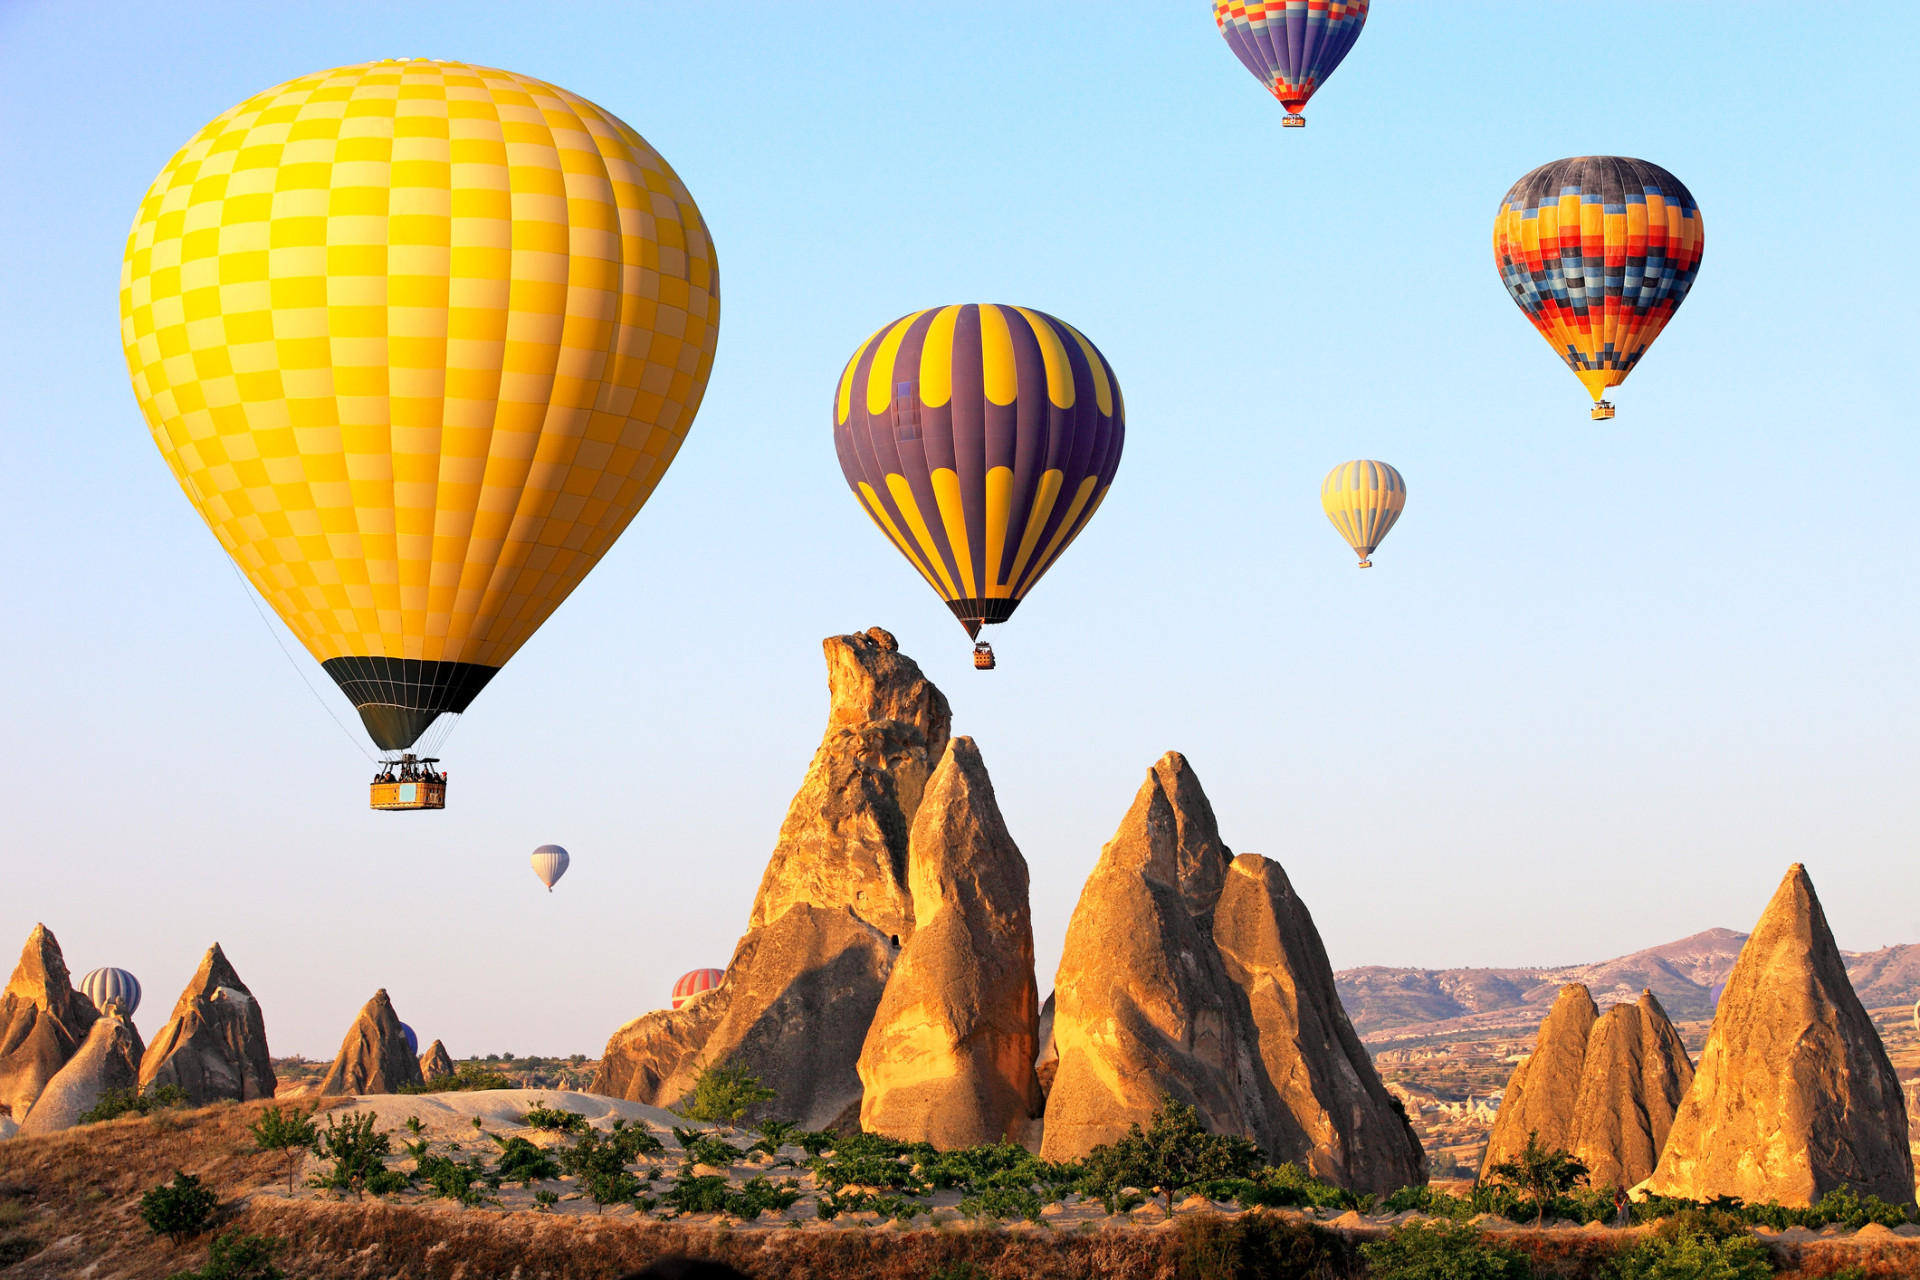 Muslim hospitality means you'll never feel lonely in this country. Apart from vibrant Istanbul, you can also head to central Turkey for the experience of a lifetime: a hot-air balloon ride over the Cappadocia region.<p><a href="https://www.msn.com/en-us/community/channel/vid-7xx8mnucu55yw63we9va2gwr7uihbxwc68fxqp25x6tg4ftibpra?cvid=94631541bc0f4f89bfd59158d696ad7e">Follow us and access great exclusive content every day</a></p>